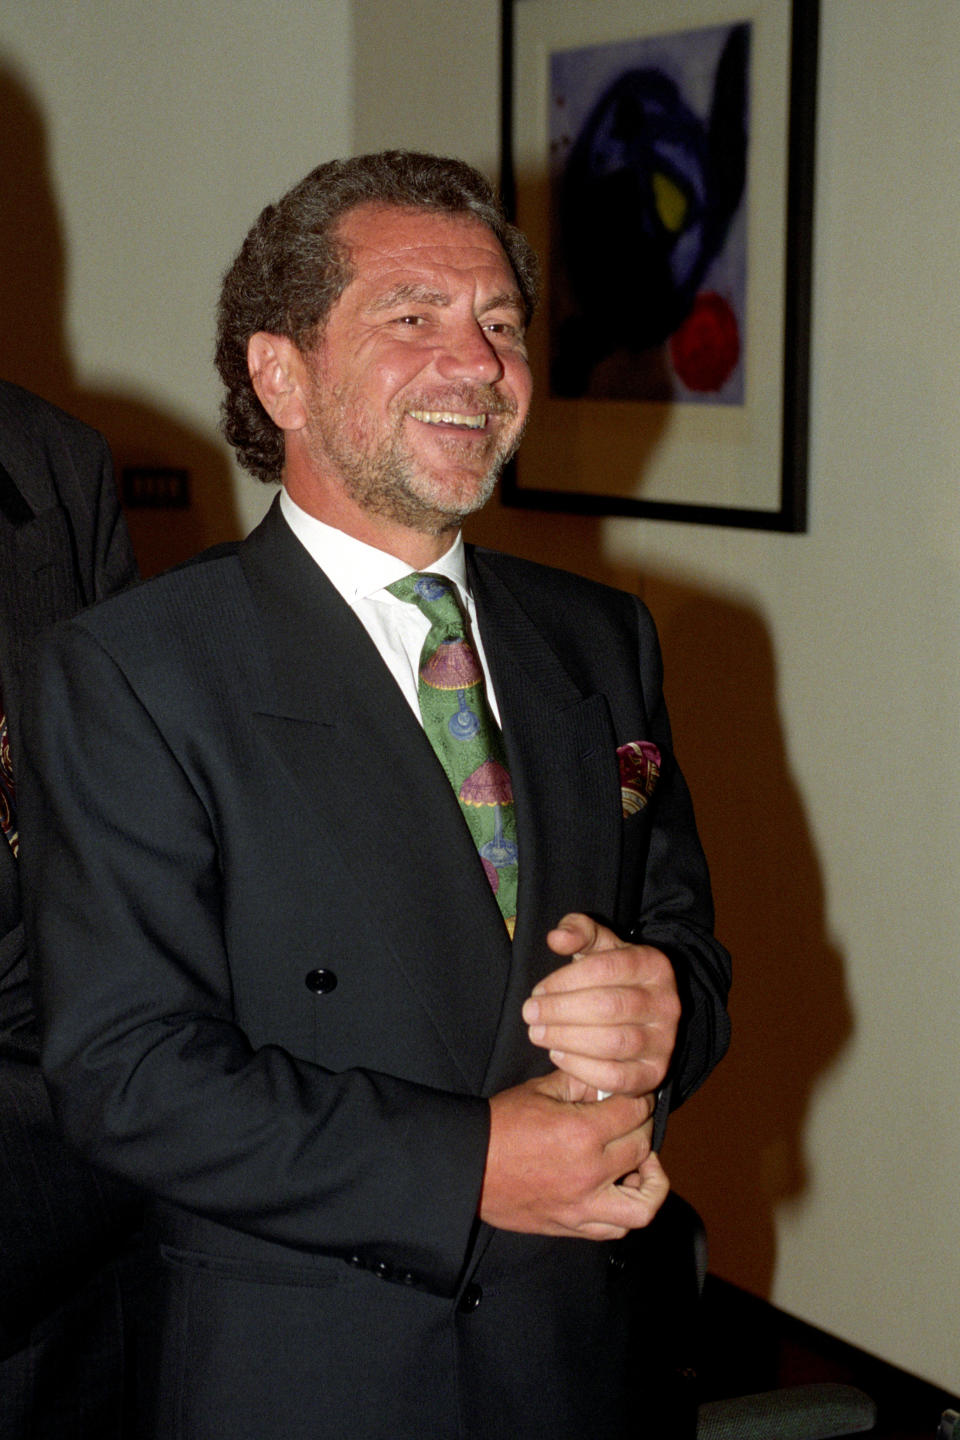 ALAN SUGAR CHAIRMAN OF TOTTENHAM
HOTSPUR FOOTBALL CLUB, DURING A NEWS
CONFERENCE IN LONDON, FOLLOWING HIS
VICTORY OVER CHIEF EXECUTIVE TERRY
VENABLES IN THE HIGH COURT. 